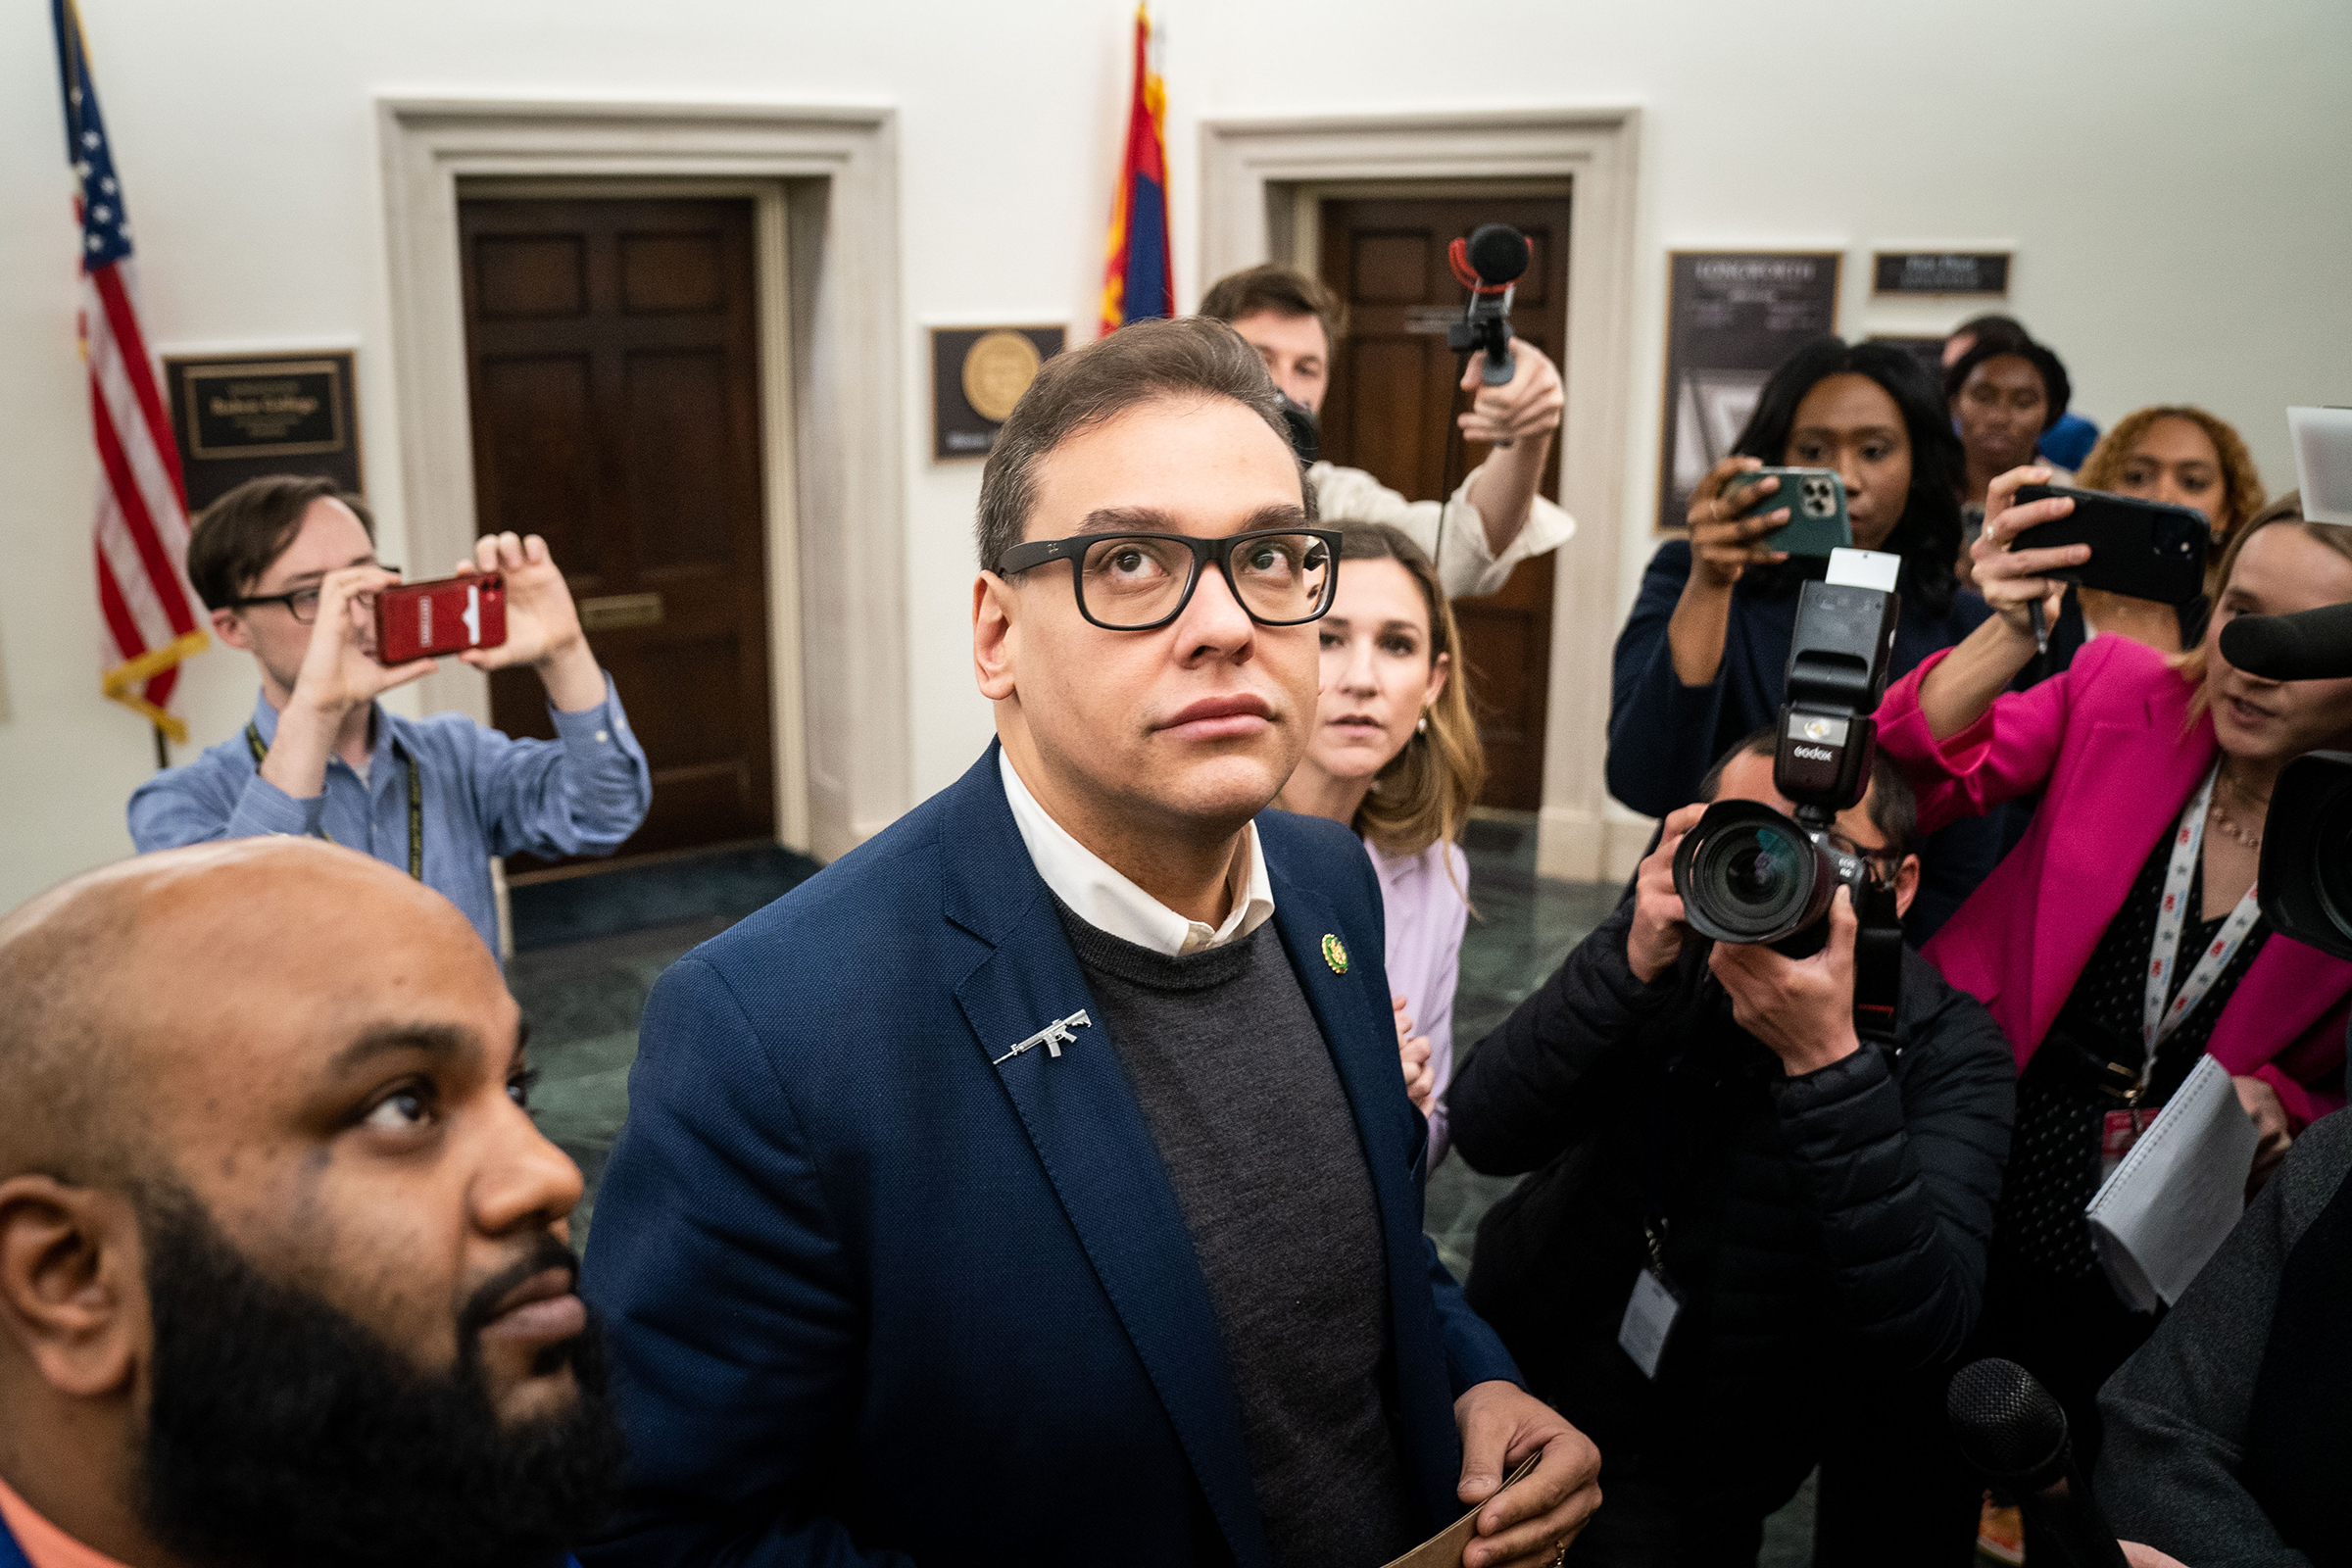 Reporters surround Rep. George Santos (R-NY) as he heads to the House Chamber for a vote on Tuesday, Jan. 31, 2023 in Washington, DC. (Kent Nishimura—Los Angeles Times/Getty Images)